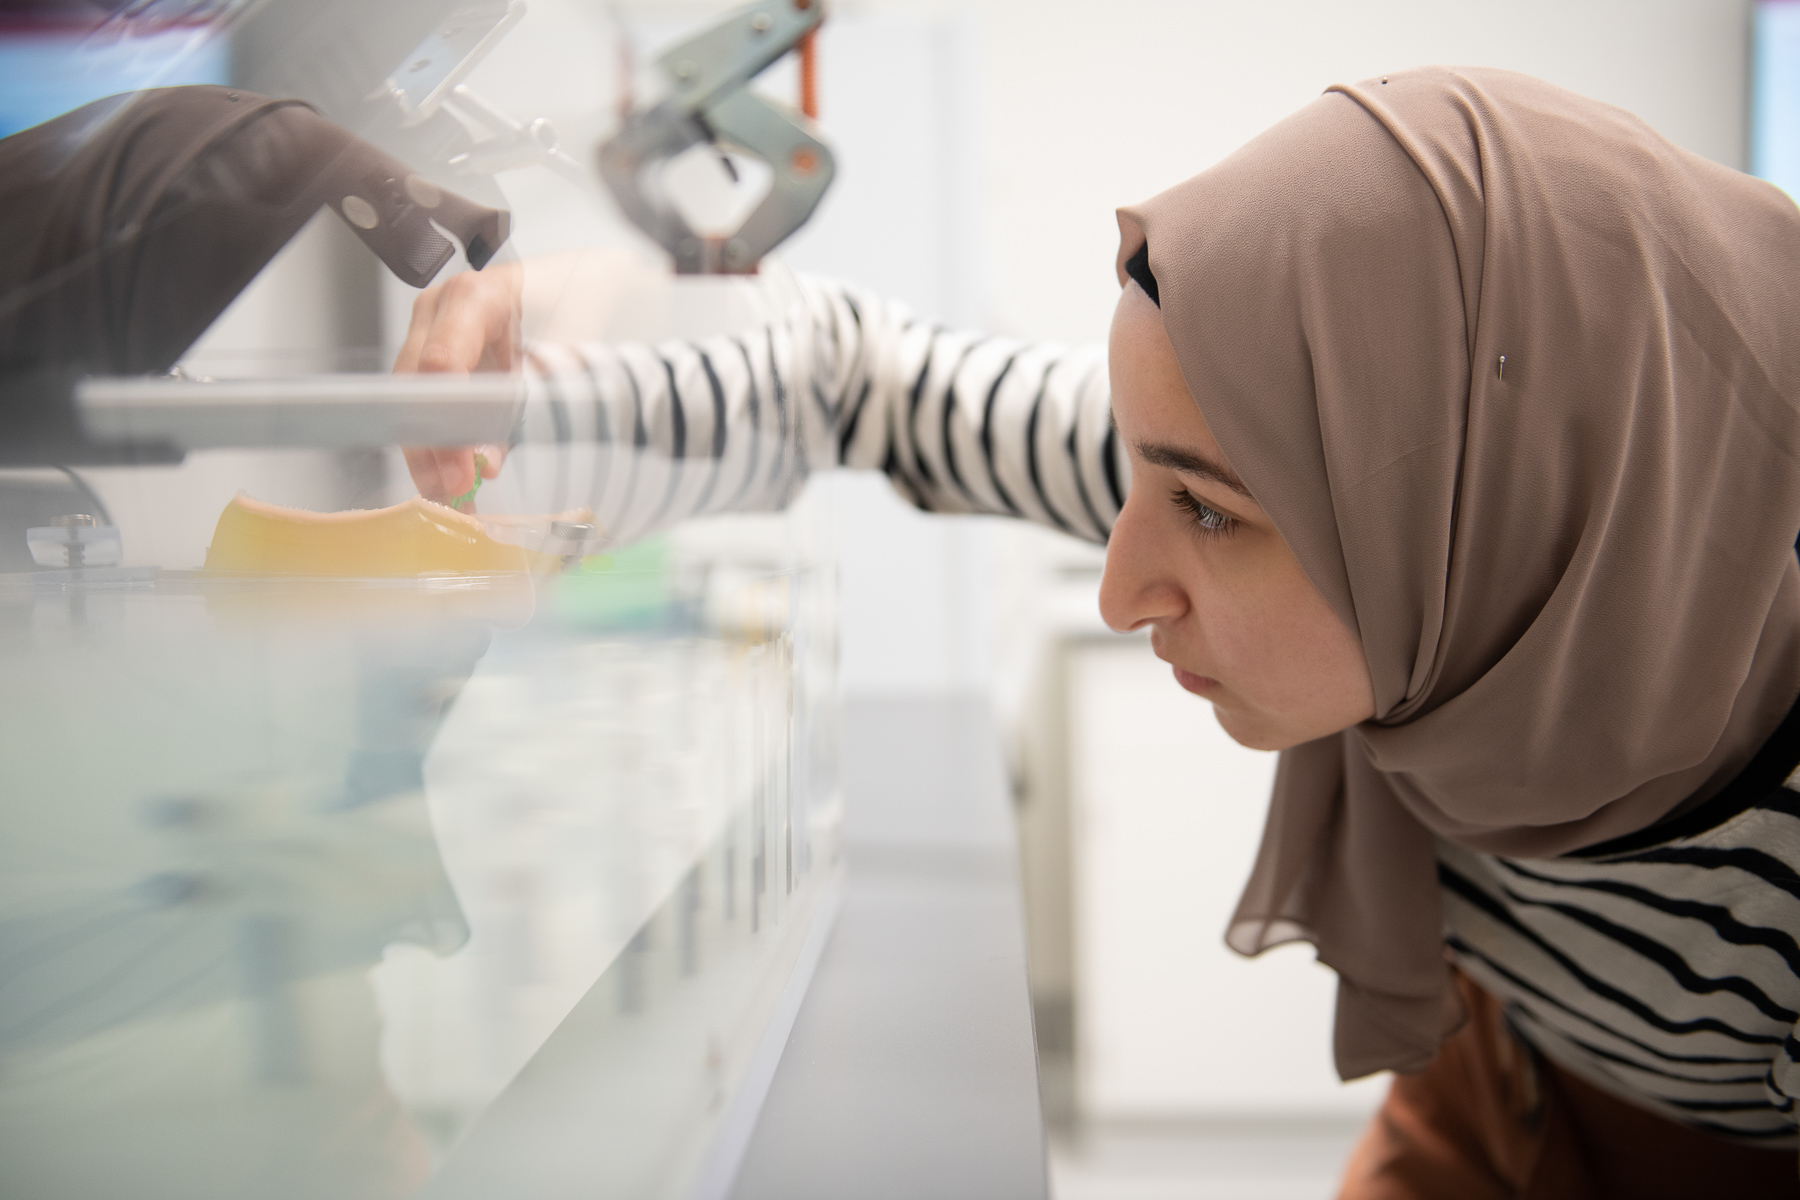 Female Scientist with headscarf performs experiment